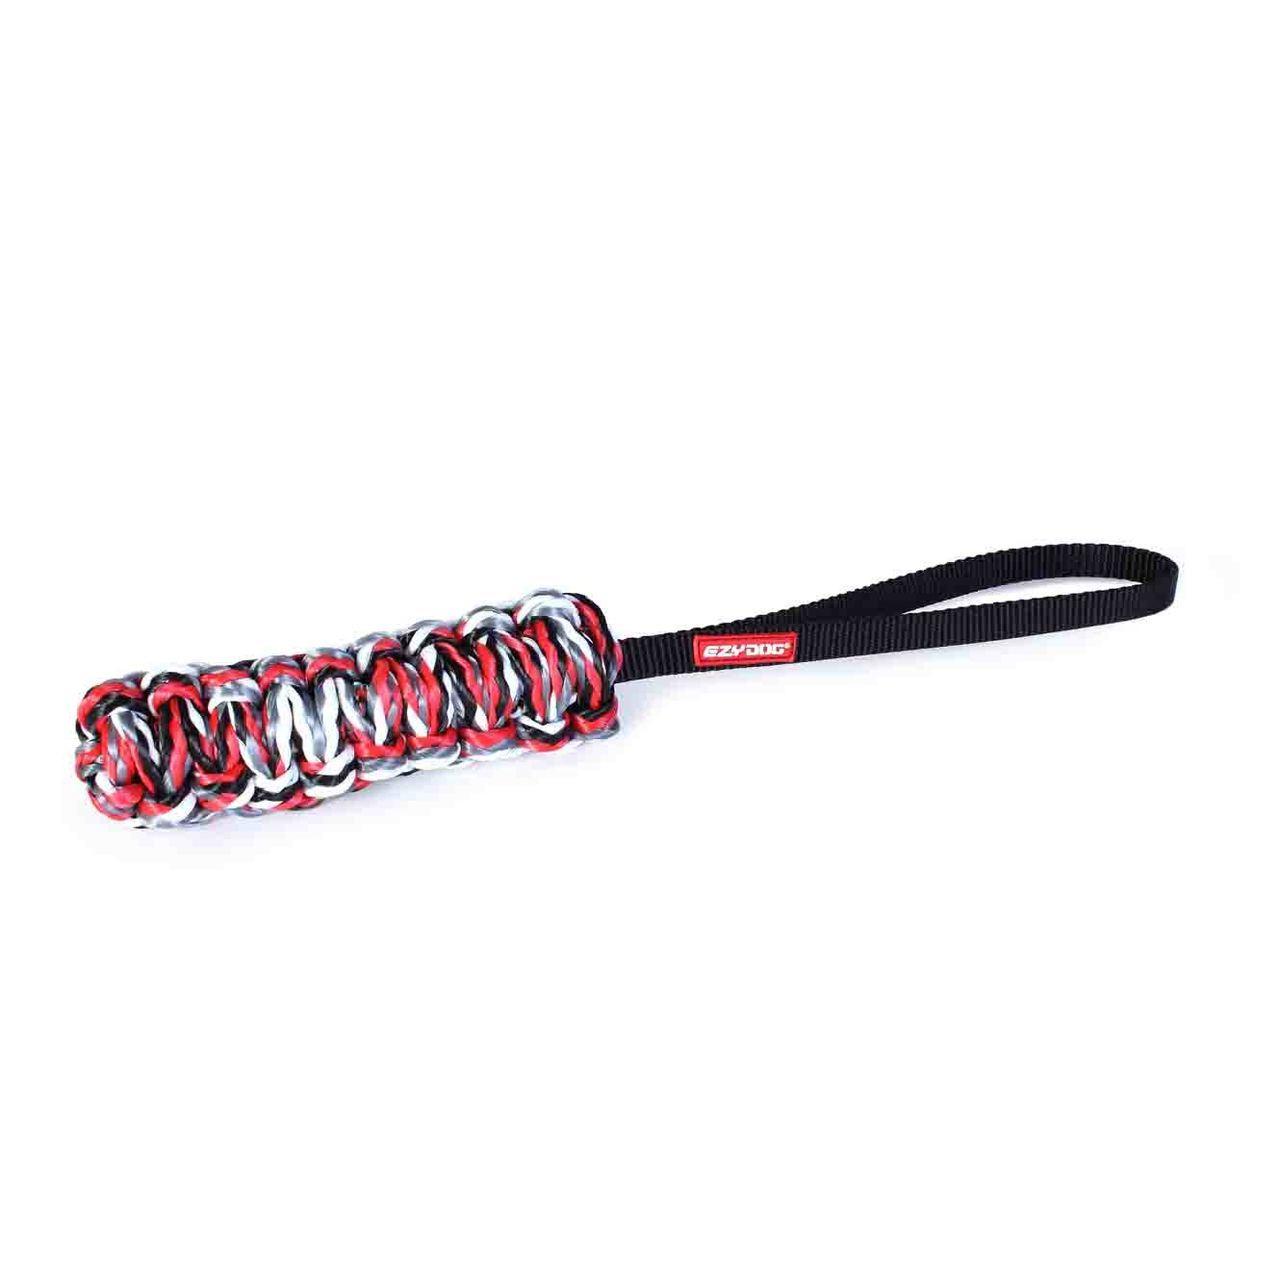 EzyDog Beaver Tail Tug Toy For Dogs Small